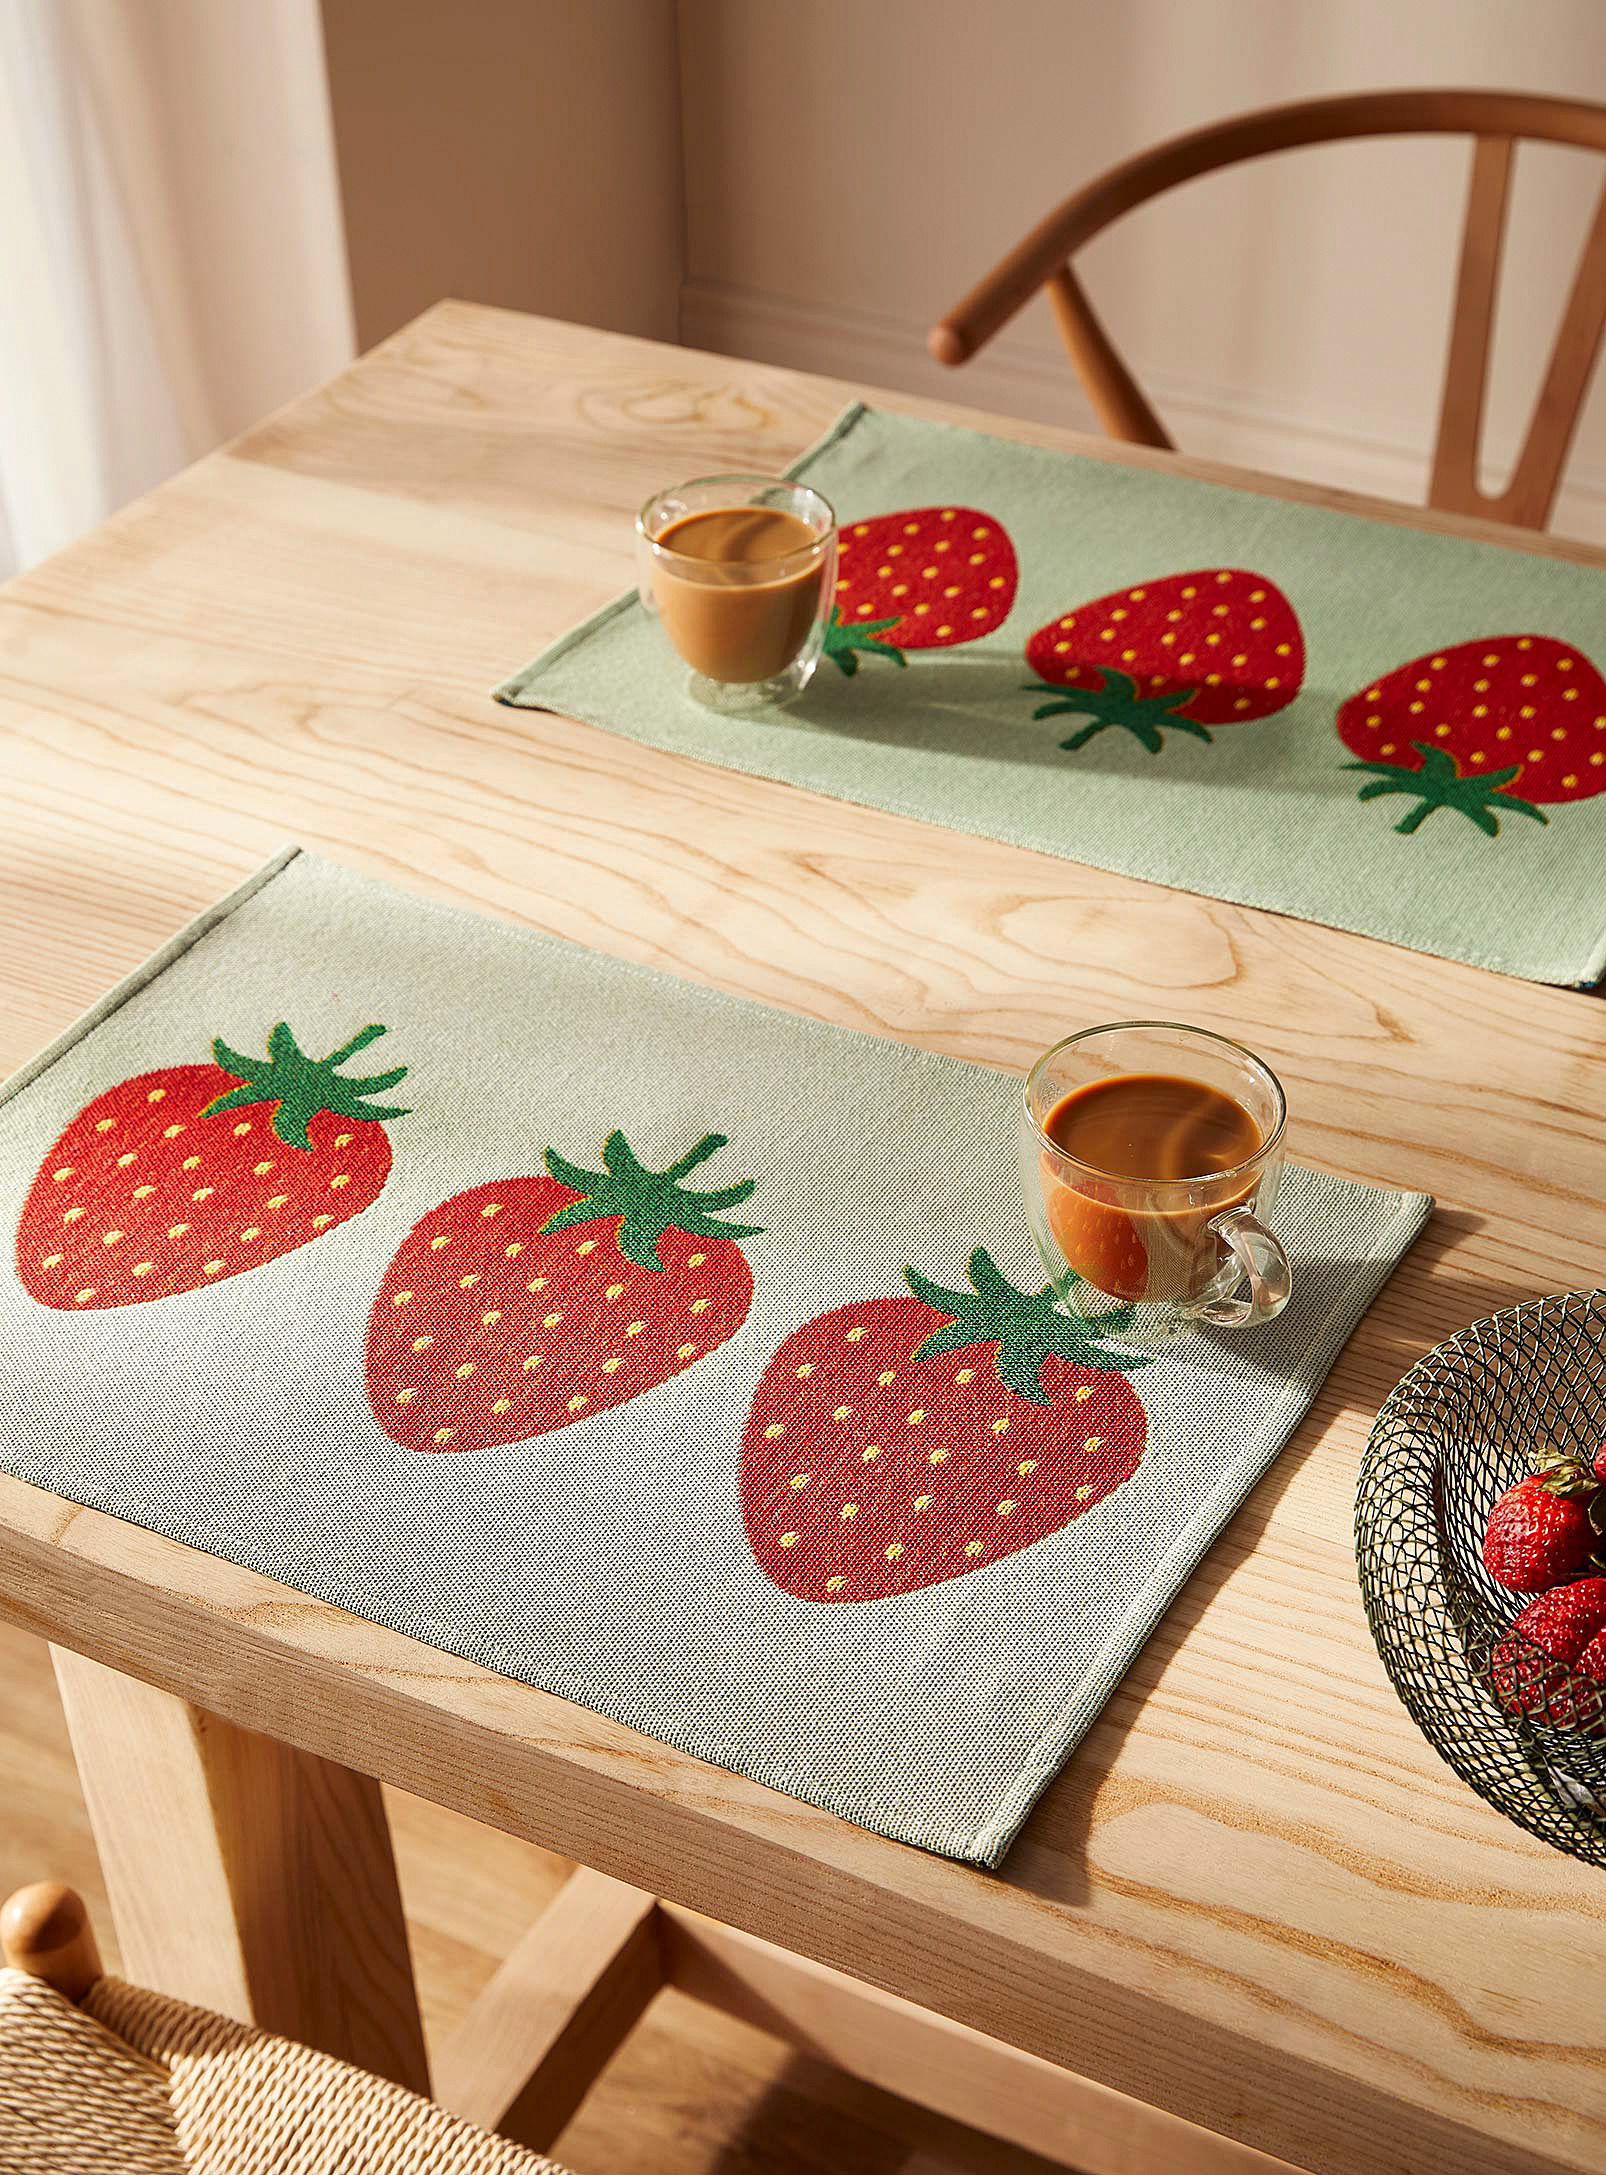 Simons Maison Strawberry Tapestry Placemats Set Of 2 In Patterned Green